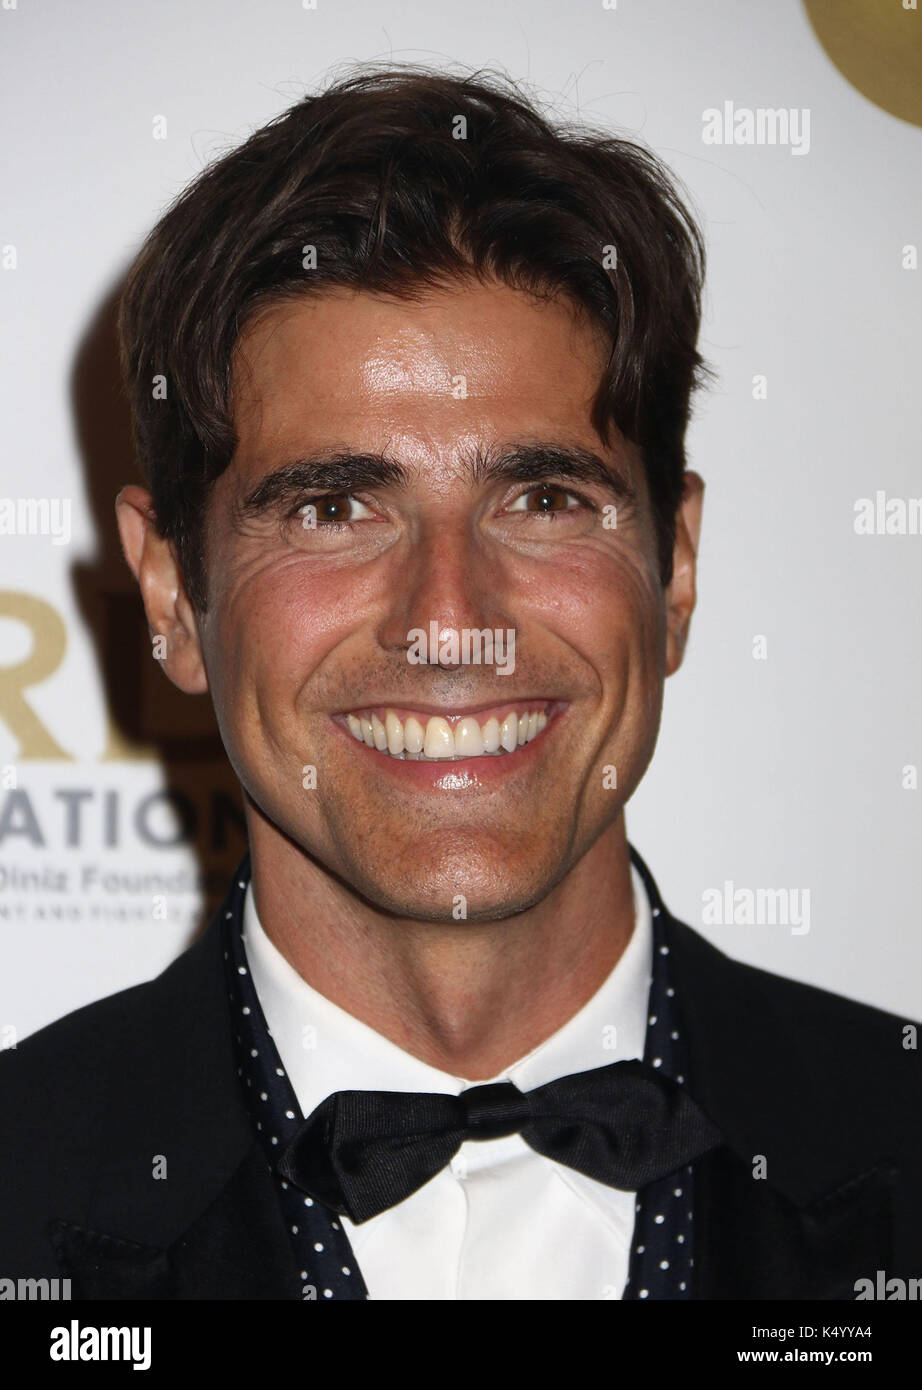 New York, New York, USA. 7th Sep, 2017. Actor REYNALDO GIANECCHINI attends The Alcides & Rosaura Diniz (ARD) Foundation's first fundraising gala, benefiting Memorial Sloan Kettering Cancer Center held at Cipriani 42nd Street. Credit: Nancy Kaszerman/ZUMA Wire/Alamy Live News Stock Photo